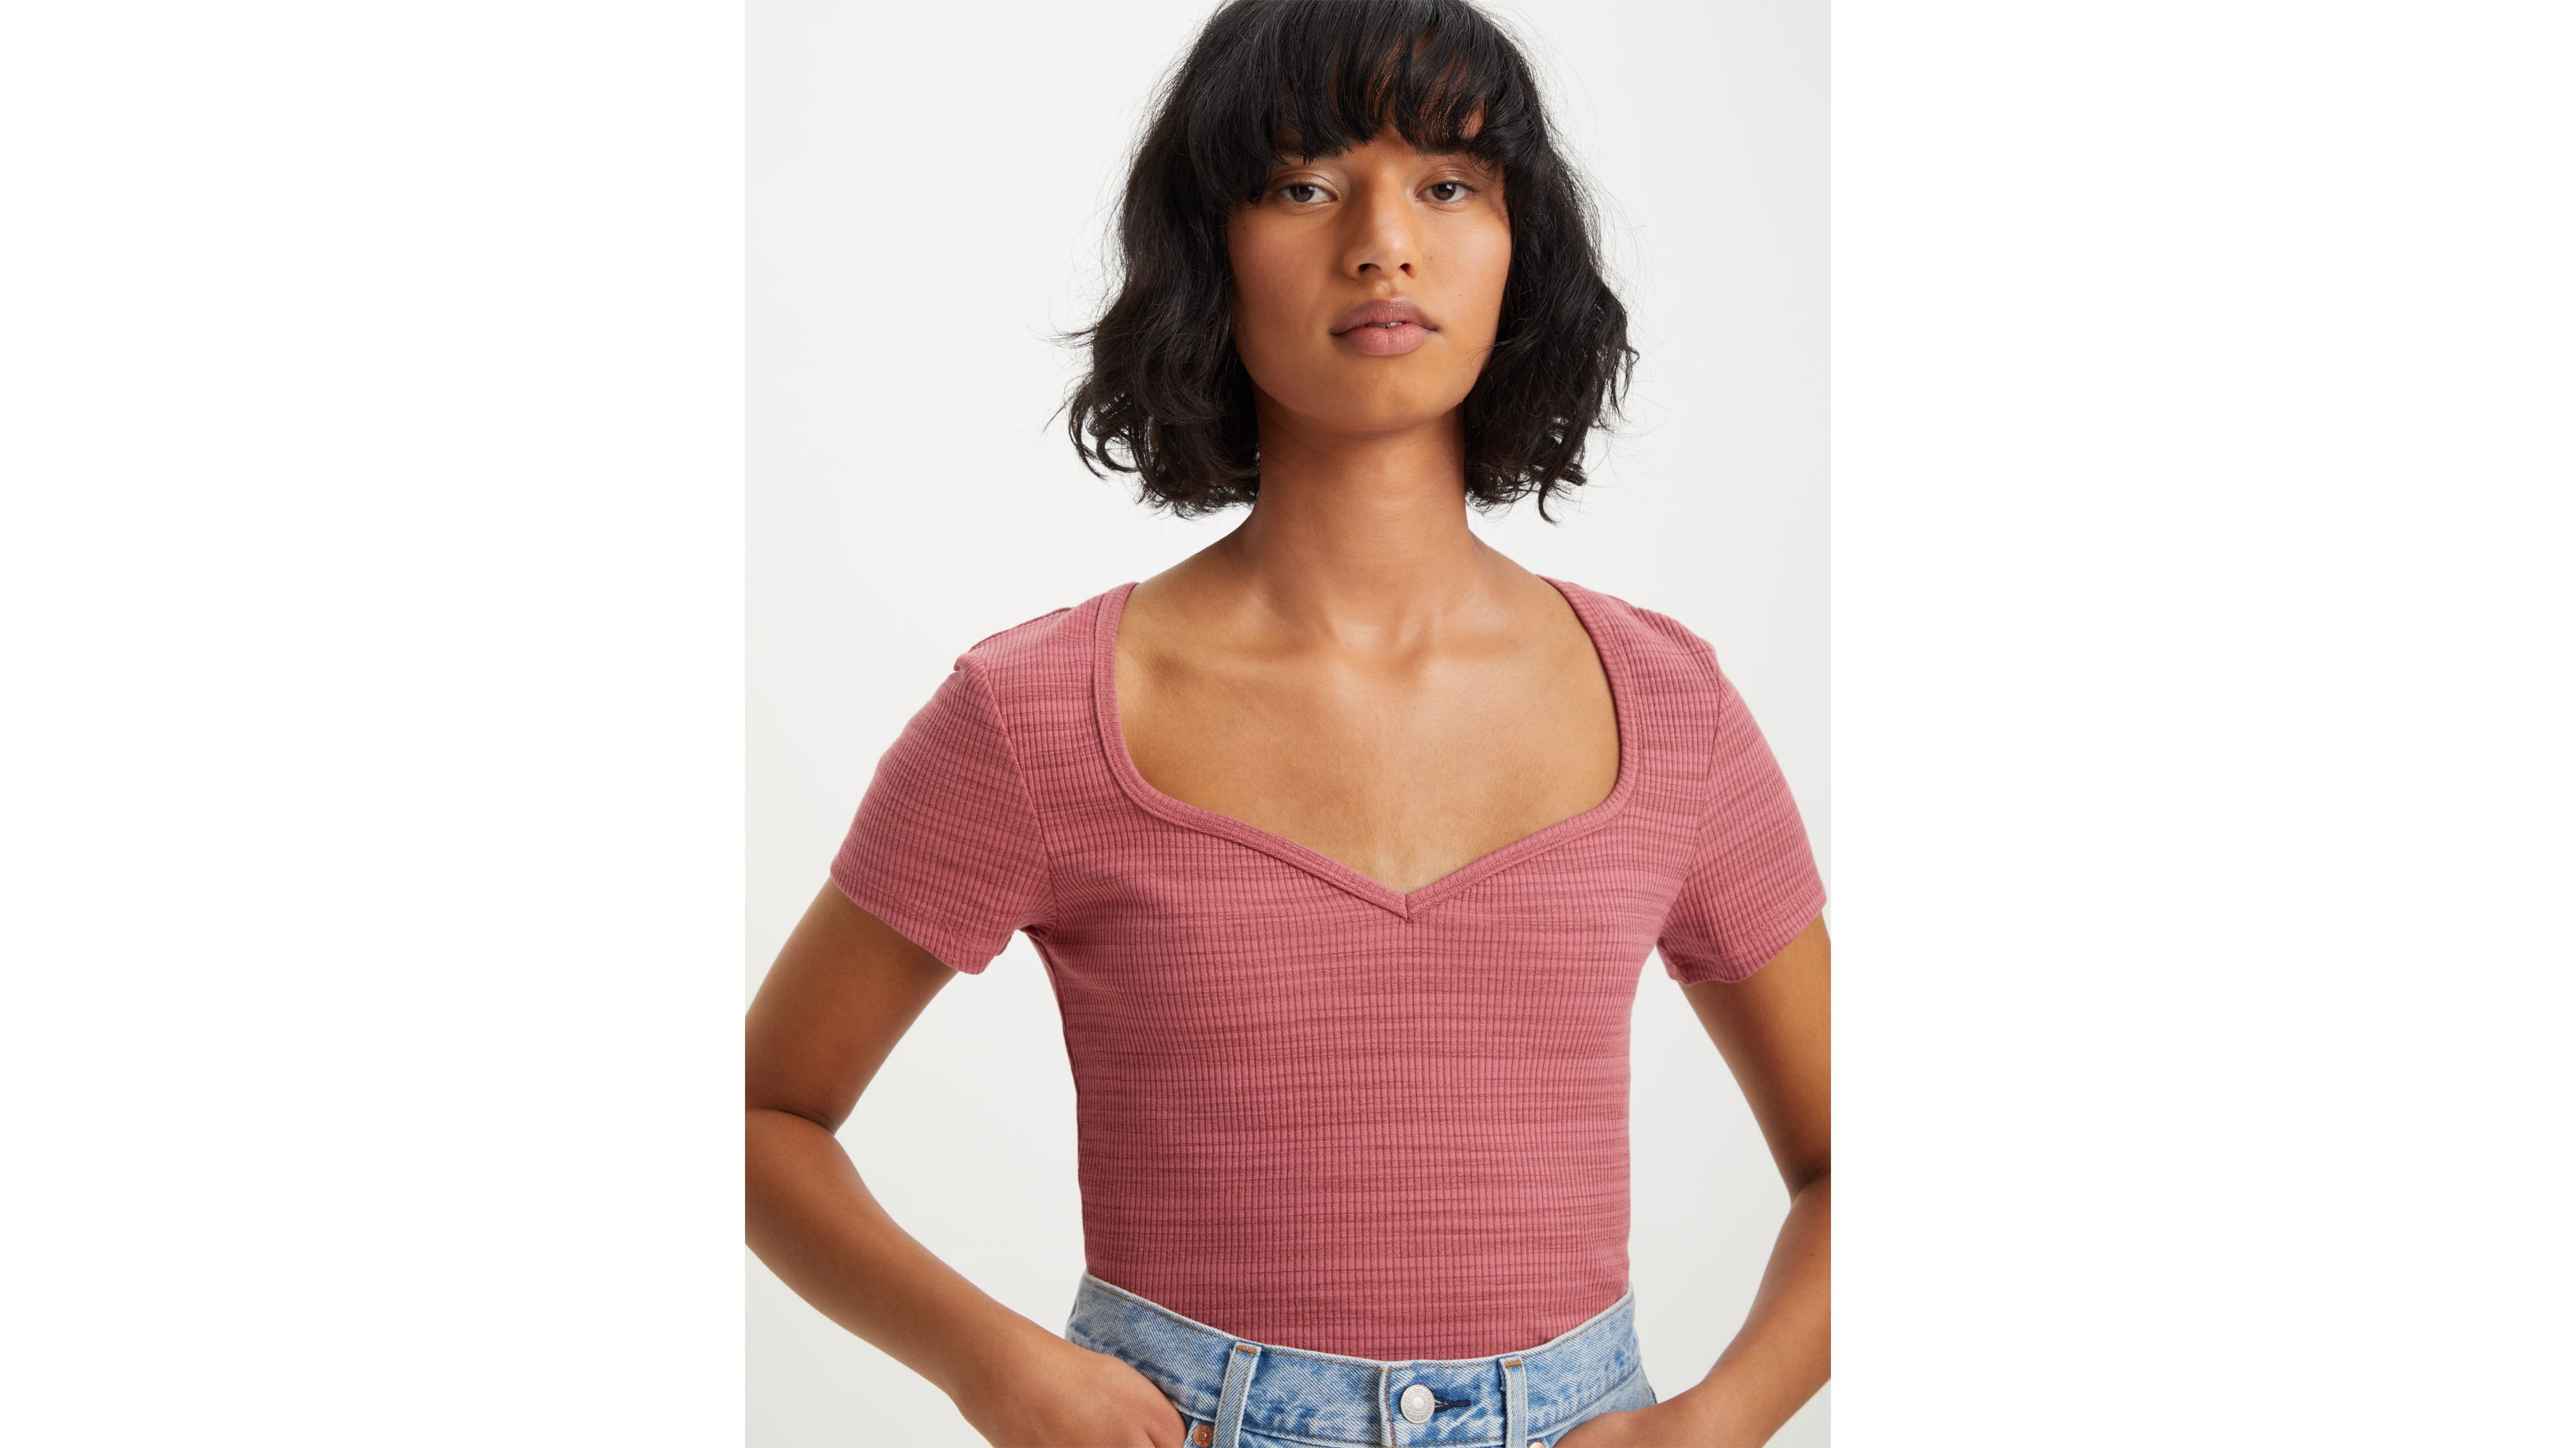 Carrie Sweetheart Top